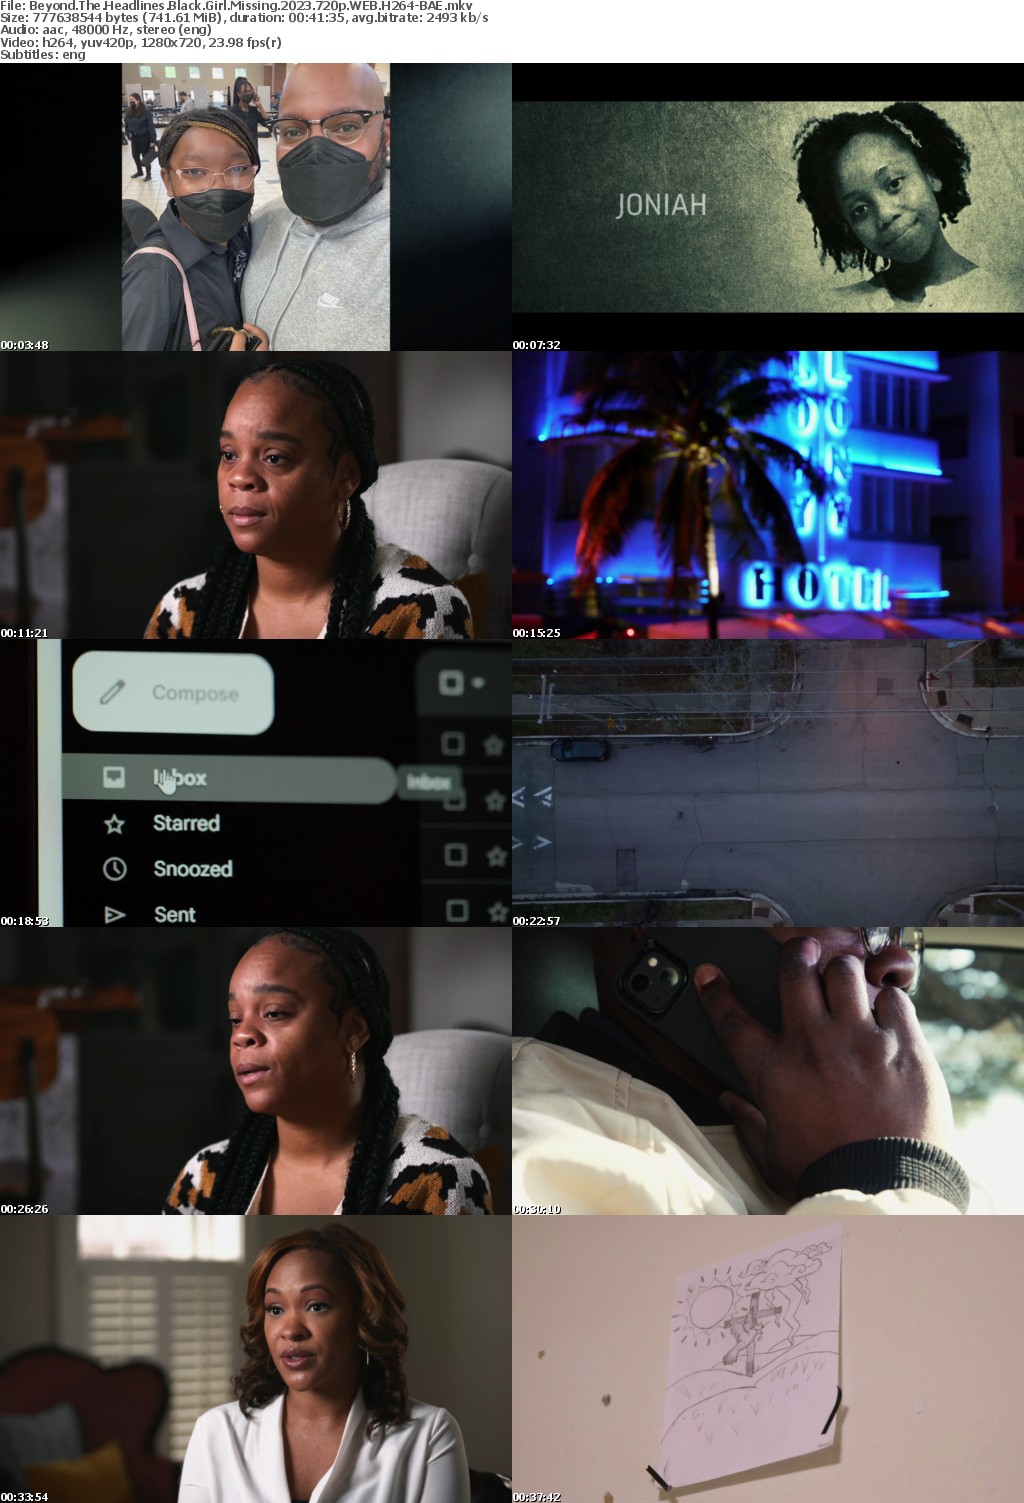 Black Girl Missing (with DOC) 2023 720p WEB h264-BAE